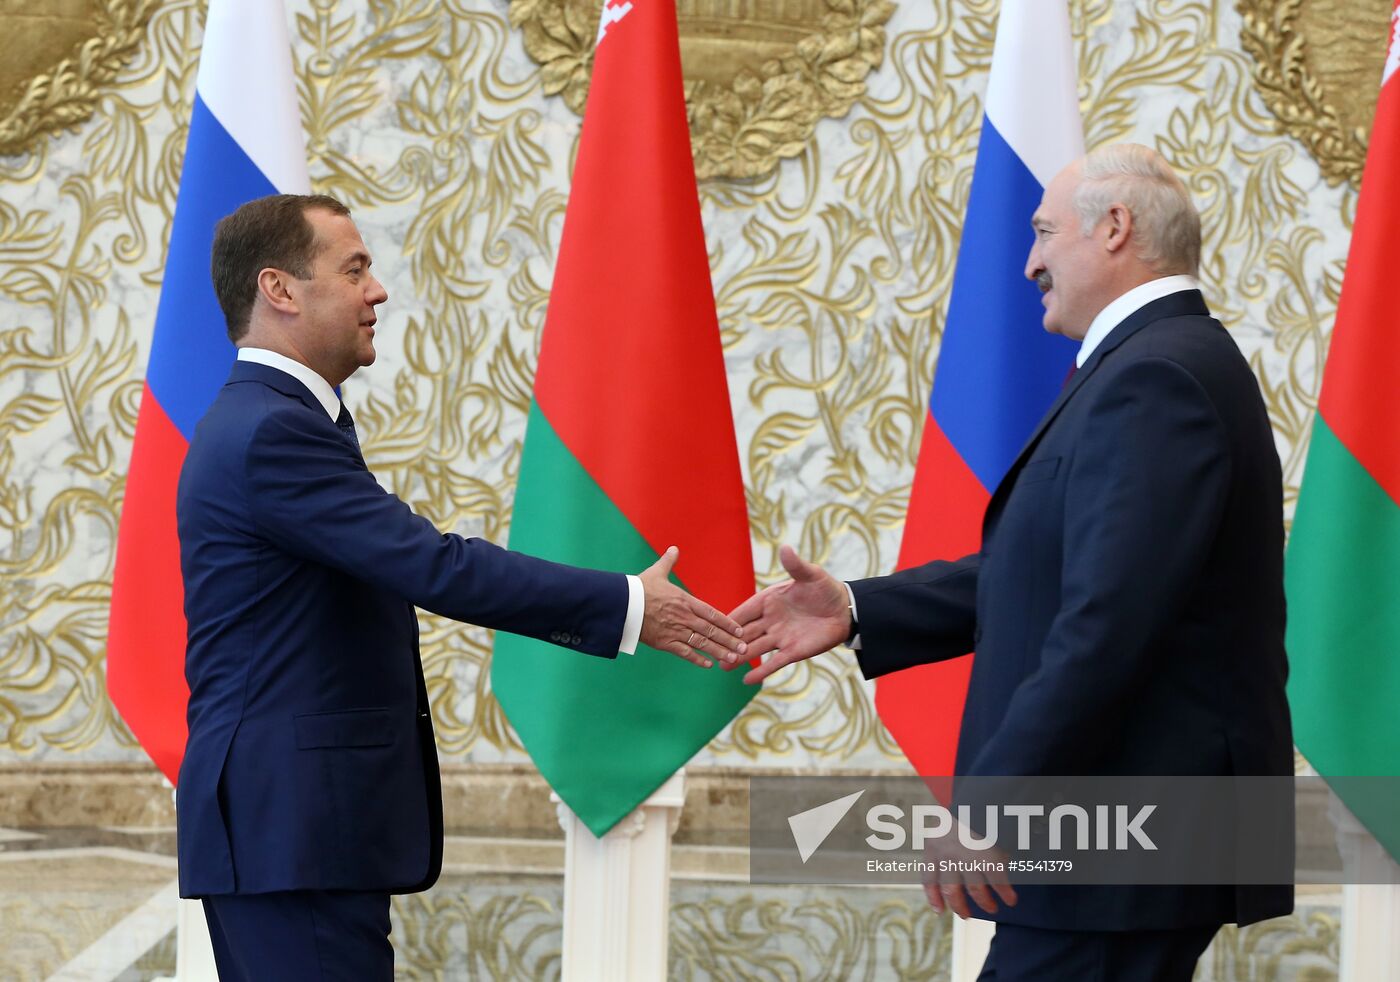 Meeting of Supreme State Council of Russia-Belarus Union State